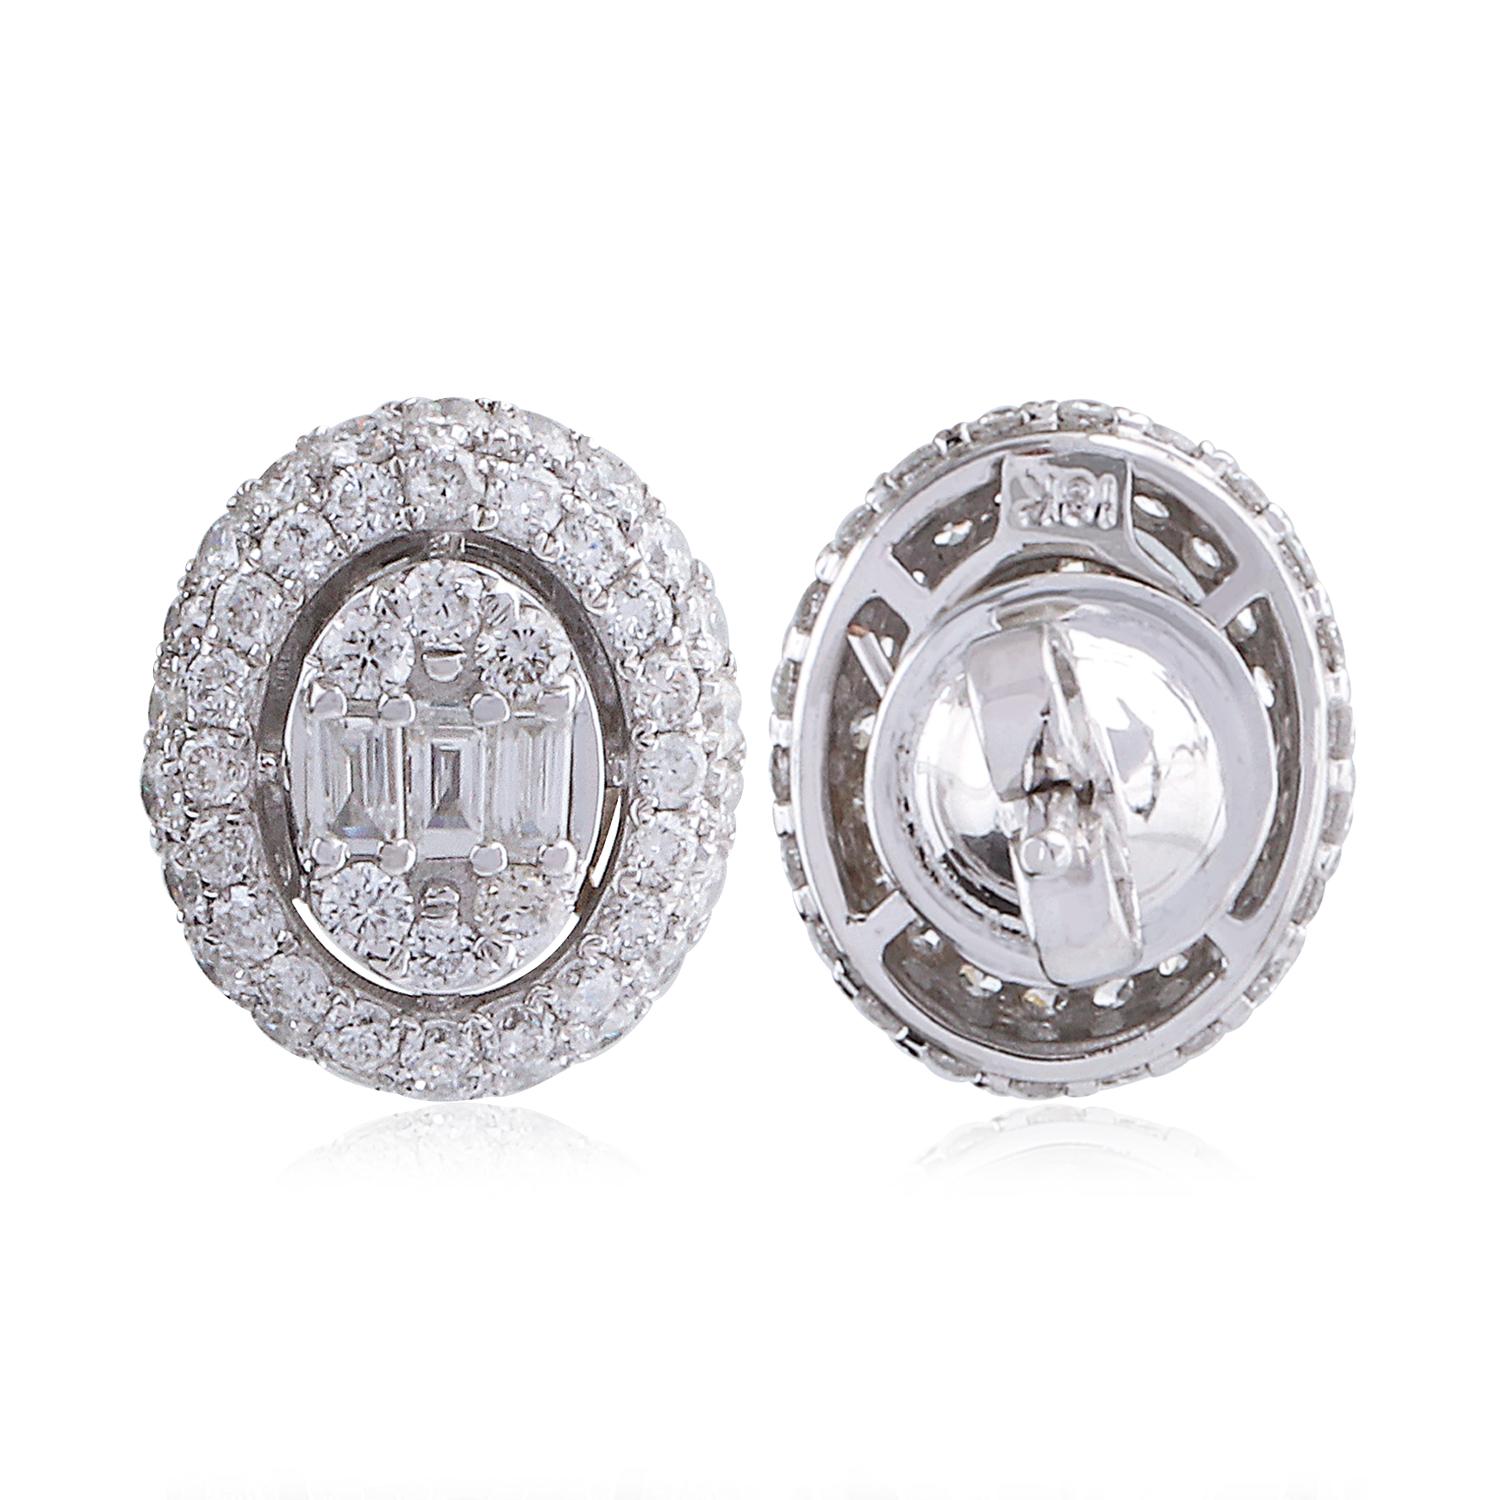 Item Code :- CN-24965
Gross Wet. :- 3.25 gm
18k White Gold Wet. :- 2.98 gm
Diamond Wet. :- 1.35 Carat ( AVERAGE DIAMOND CLARITY SI1-SI2 & COLOR H-I )
Earrings Size :- 12.02 x 10.07 x 3.93 mm approx.
✦ Sizing
.....................
We can adjust most